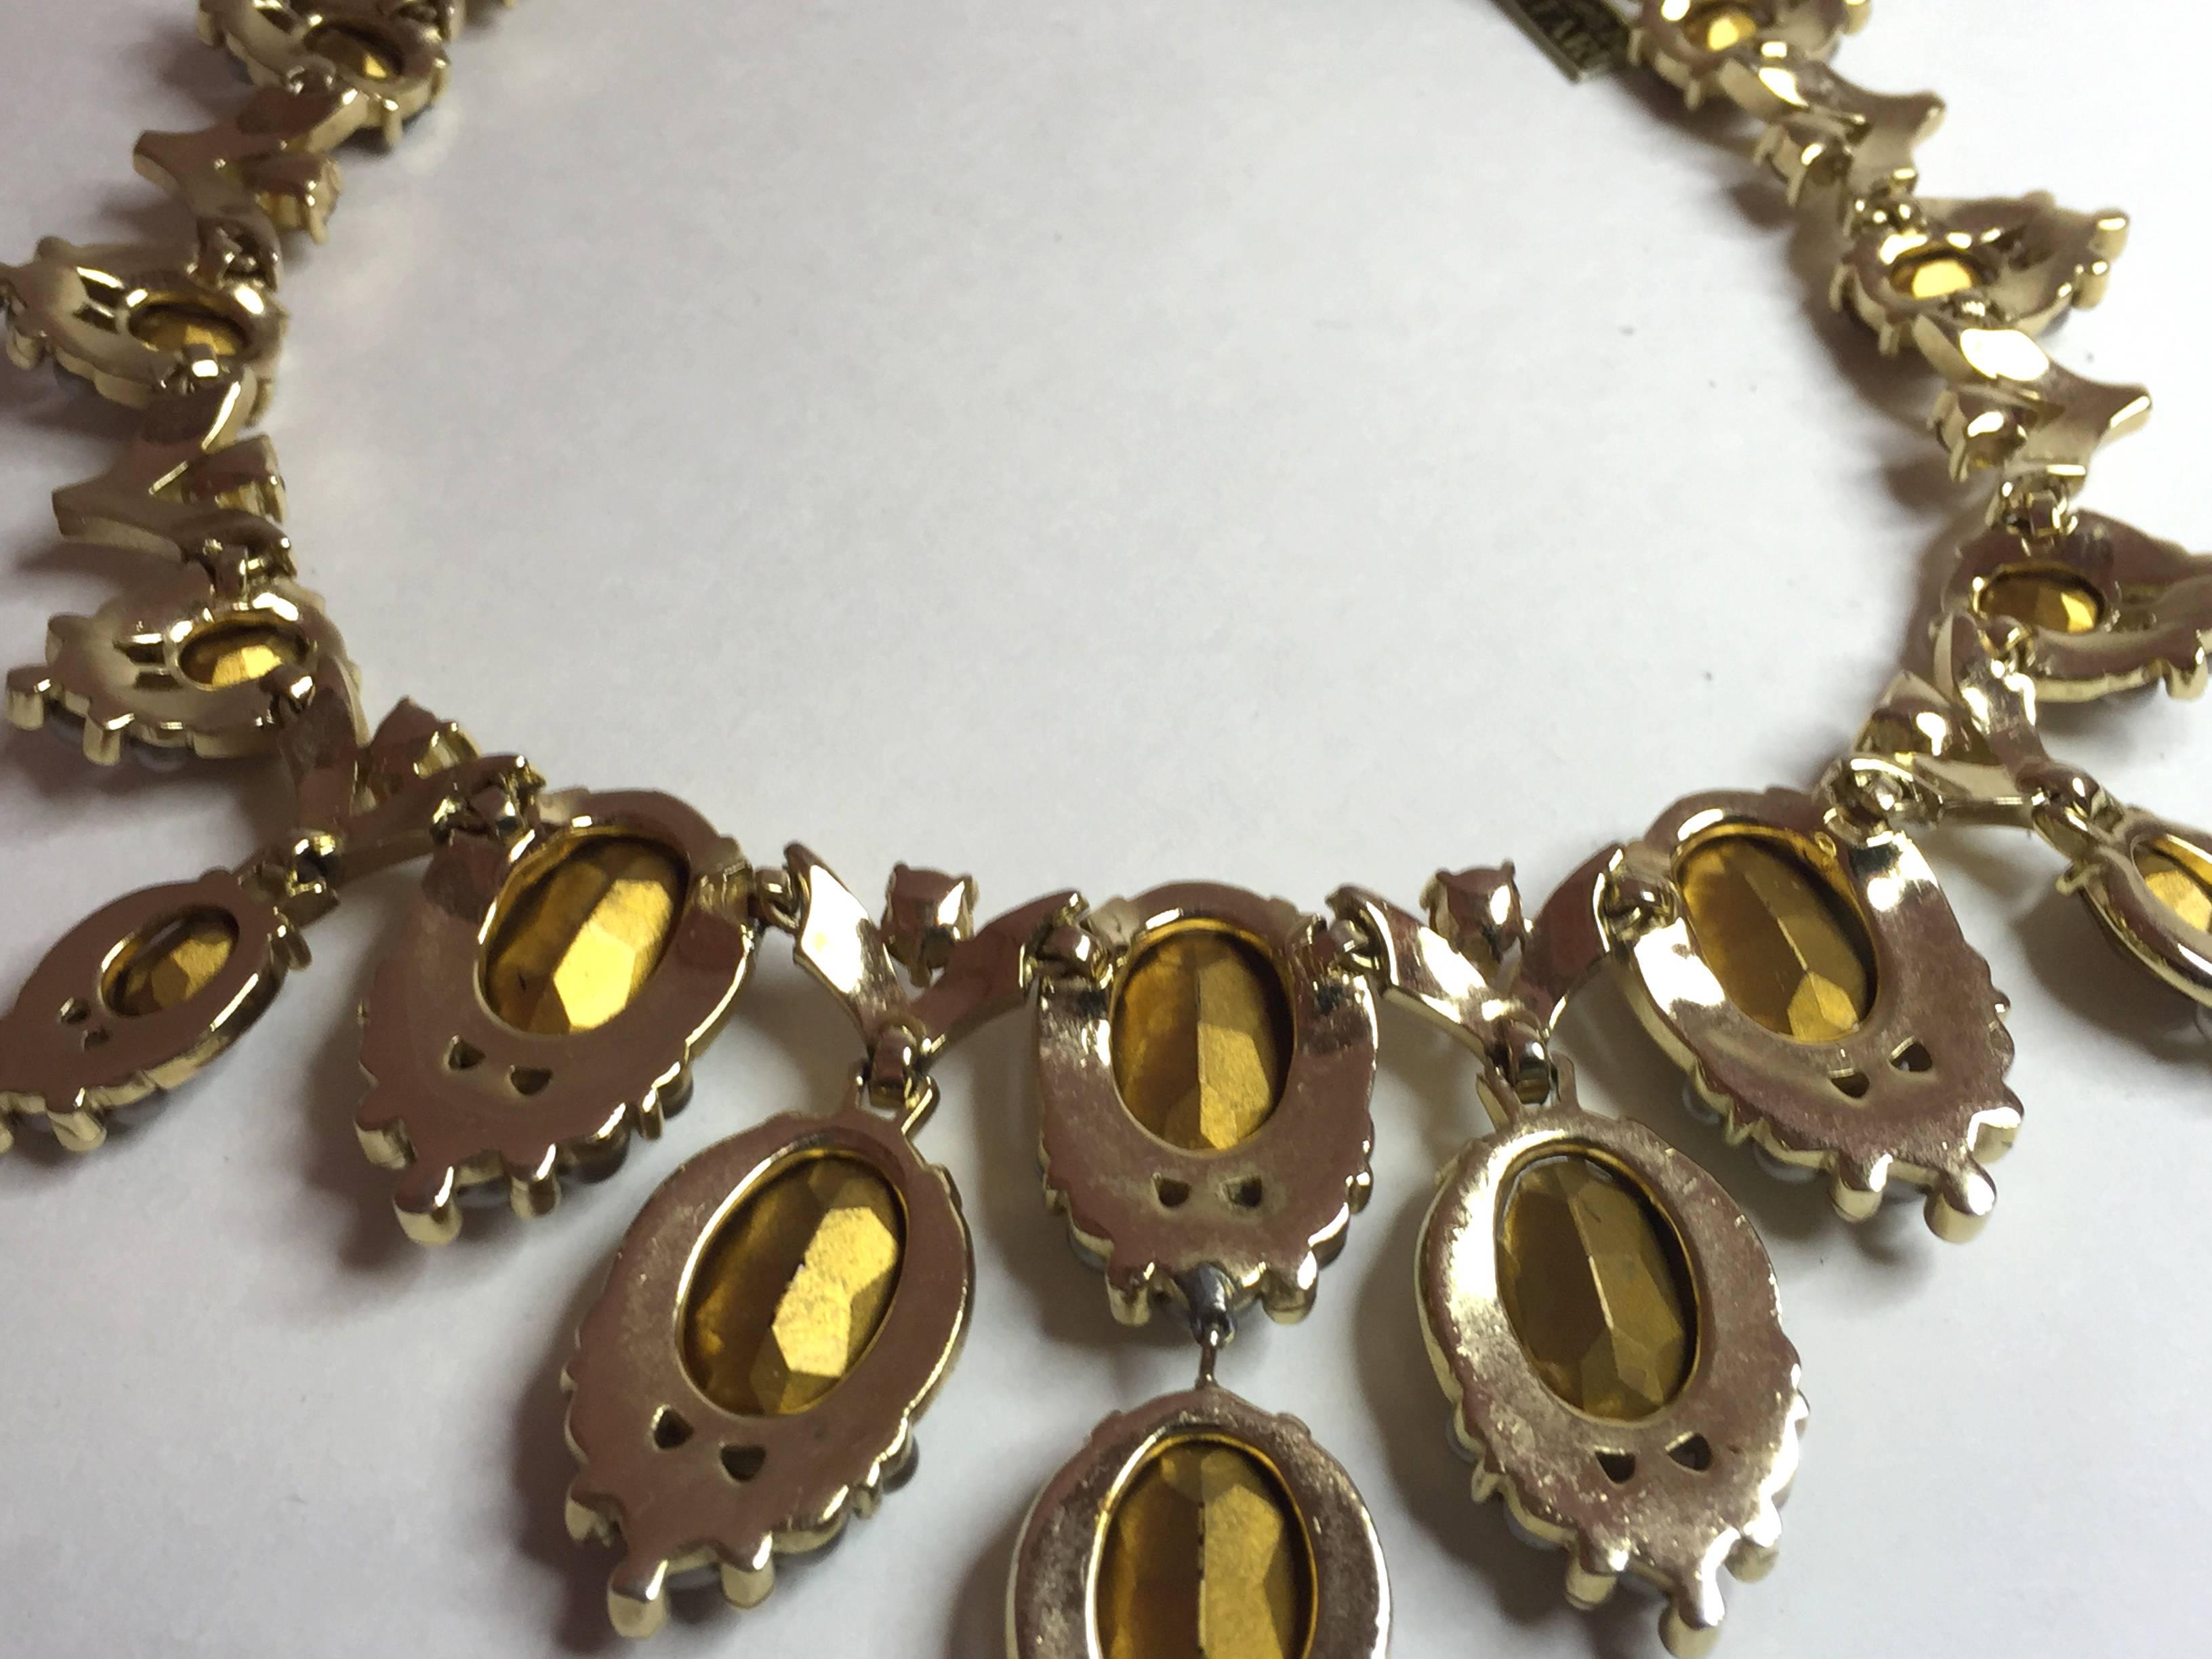 Glamorous 1950s TRIFARI Brushed Matte Goldtone Faux Topaz & Smoke Pearl Necklace For Sale 2